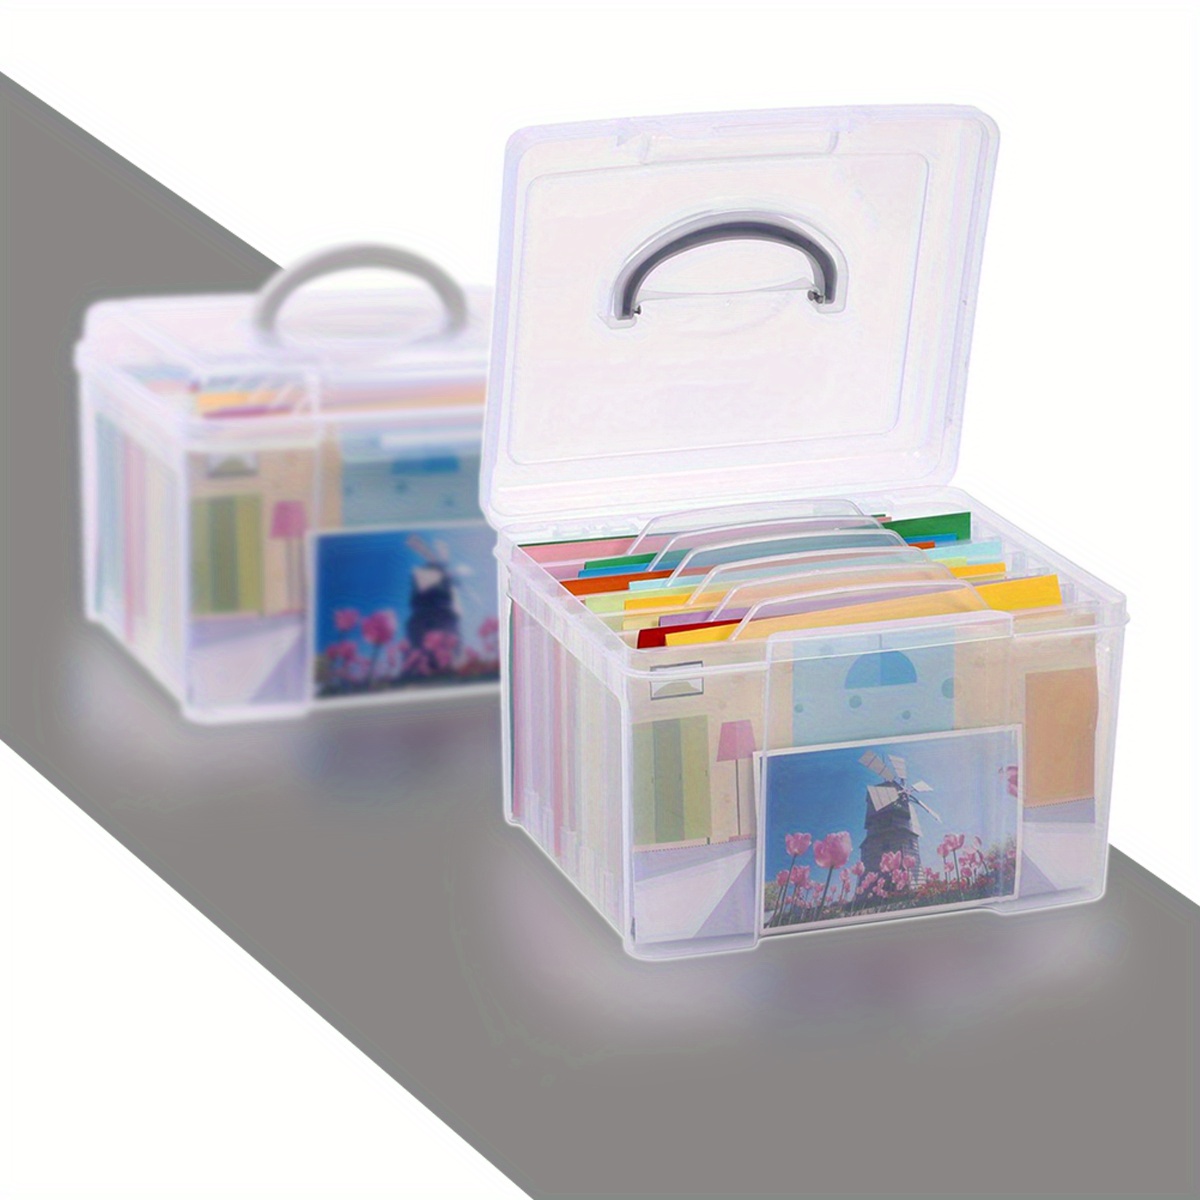 A4 File Project Case Plastic Scrapbook Storage Box Container Clear File  Document Sorting Portable Box Folder Dust-proof Box - AliExpress